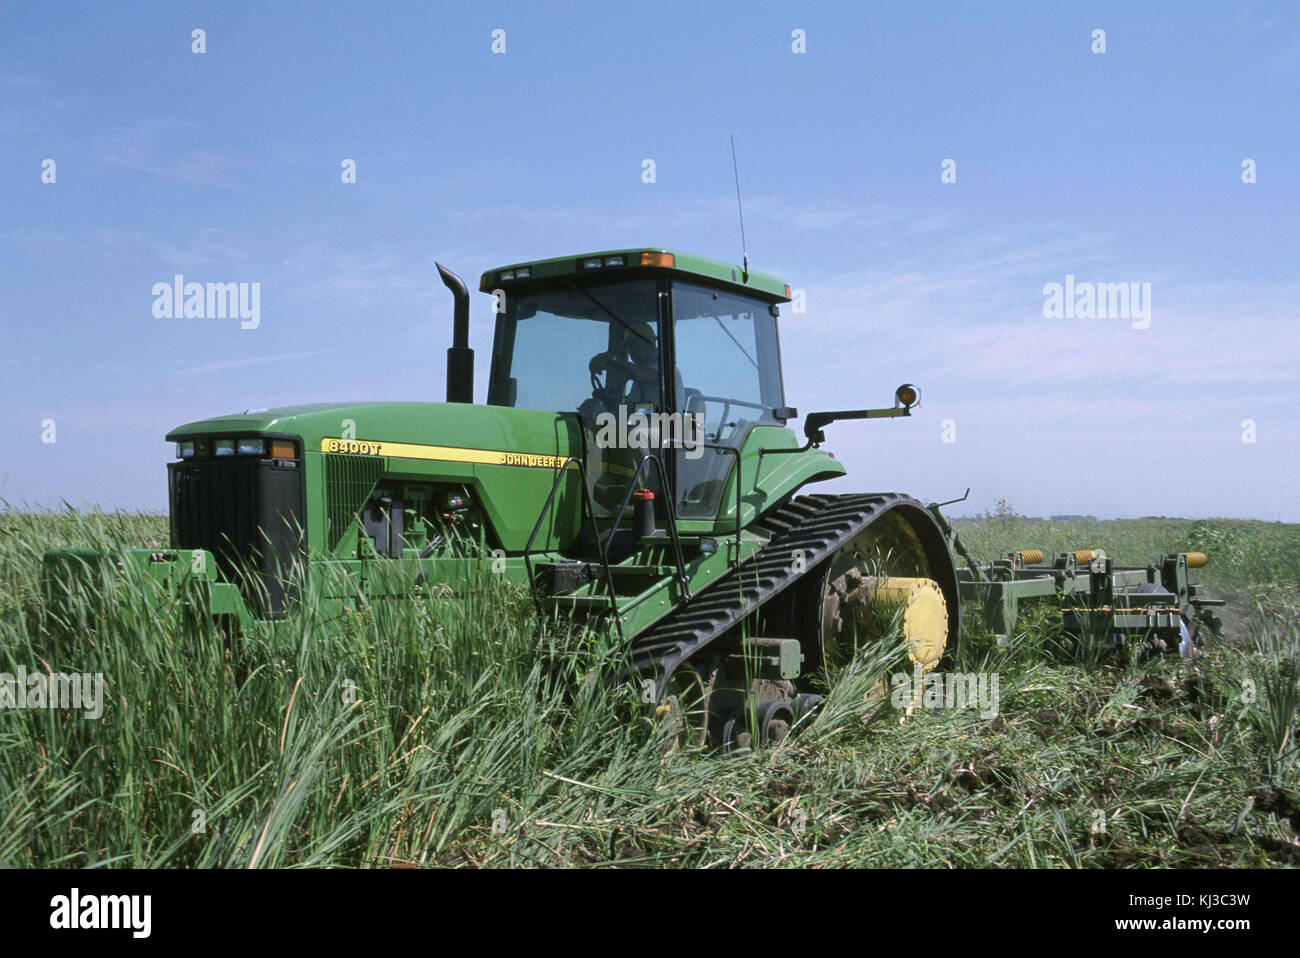 Big stron tractor wehicle working in grass Stock Photo